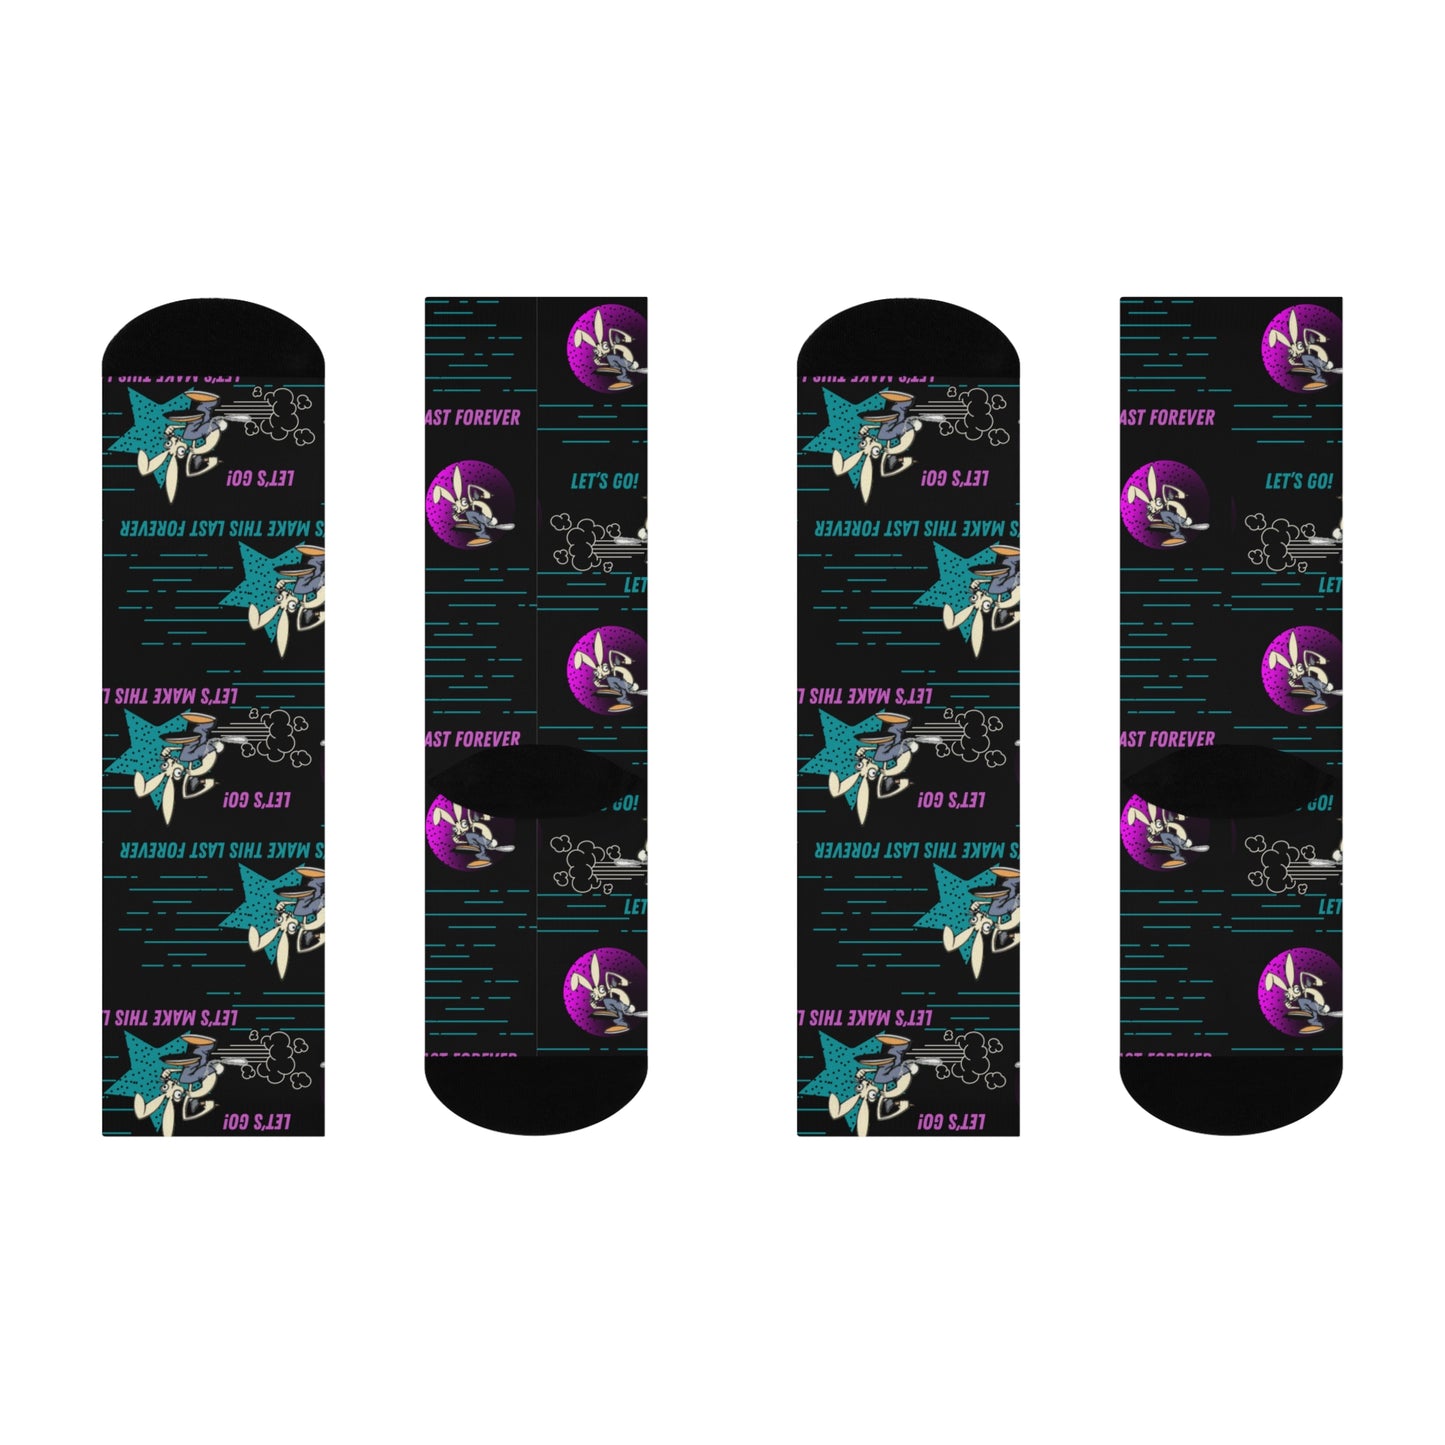 Blink 182 Socks First Date Unisex Adults Mid Calf